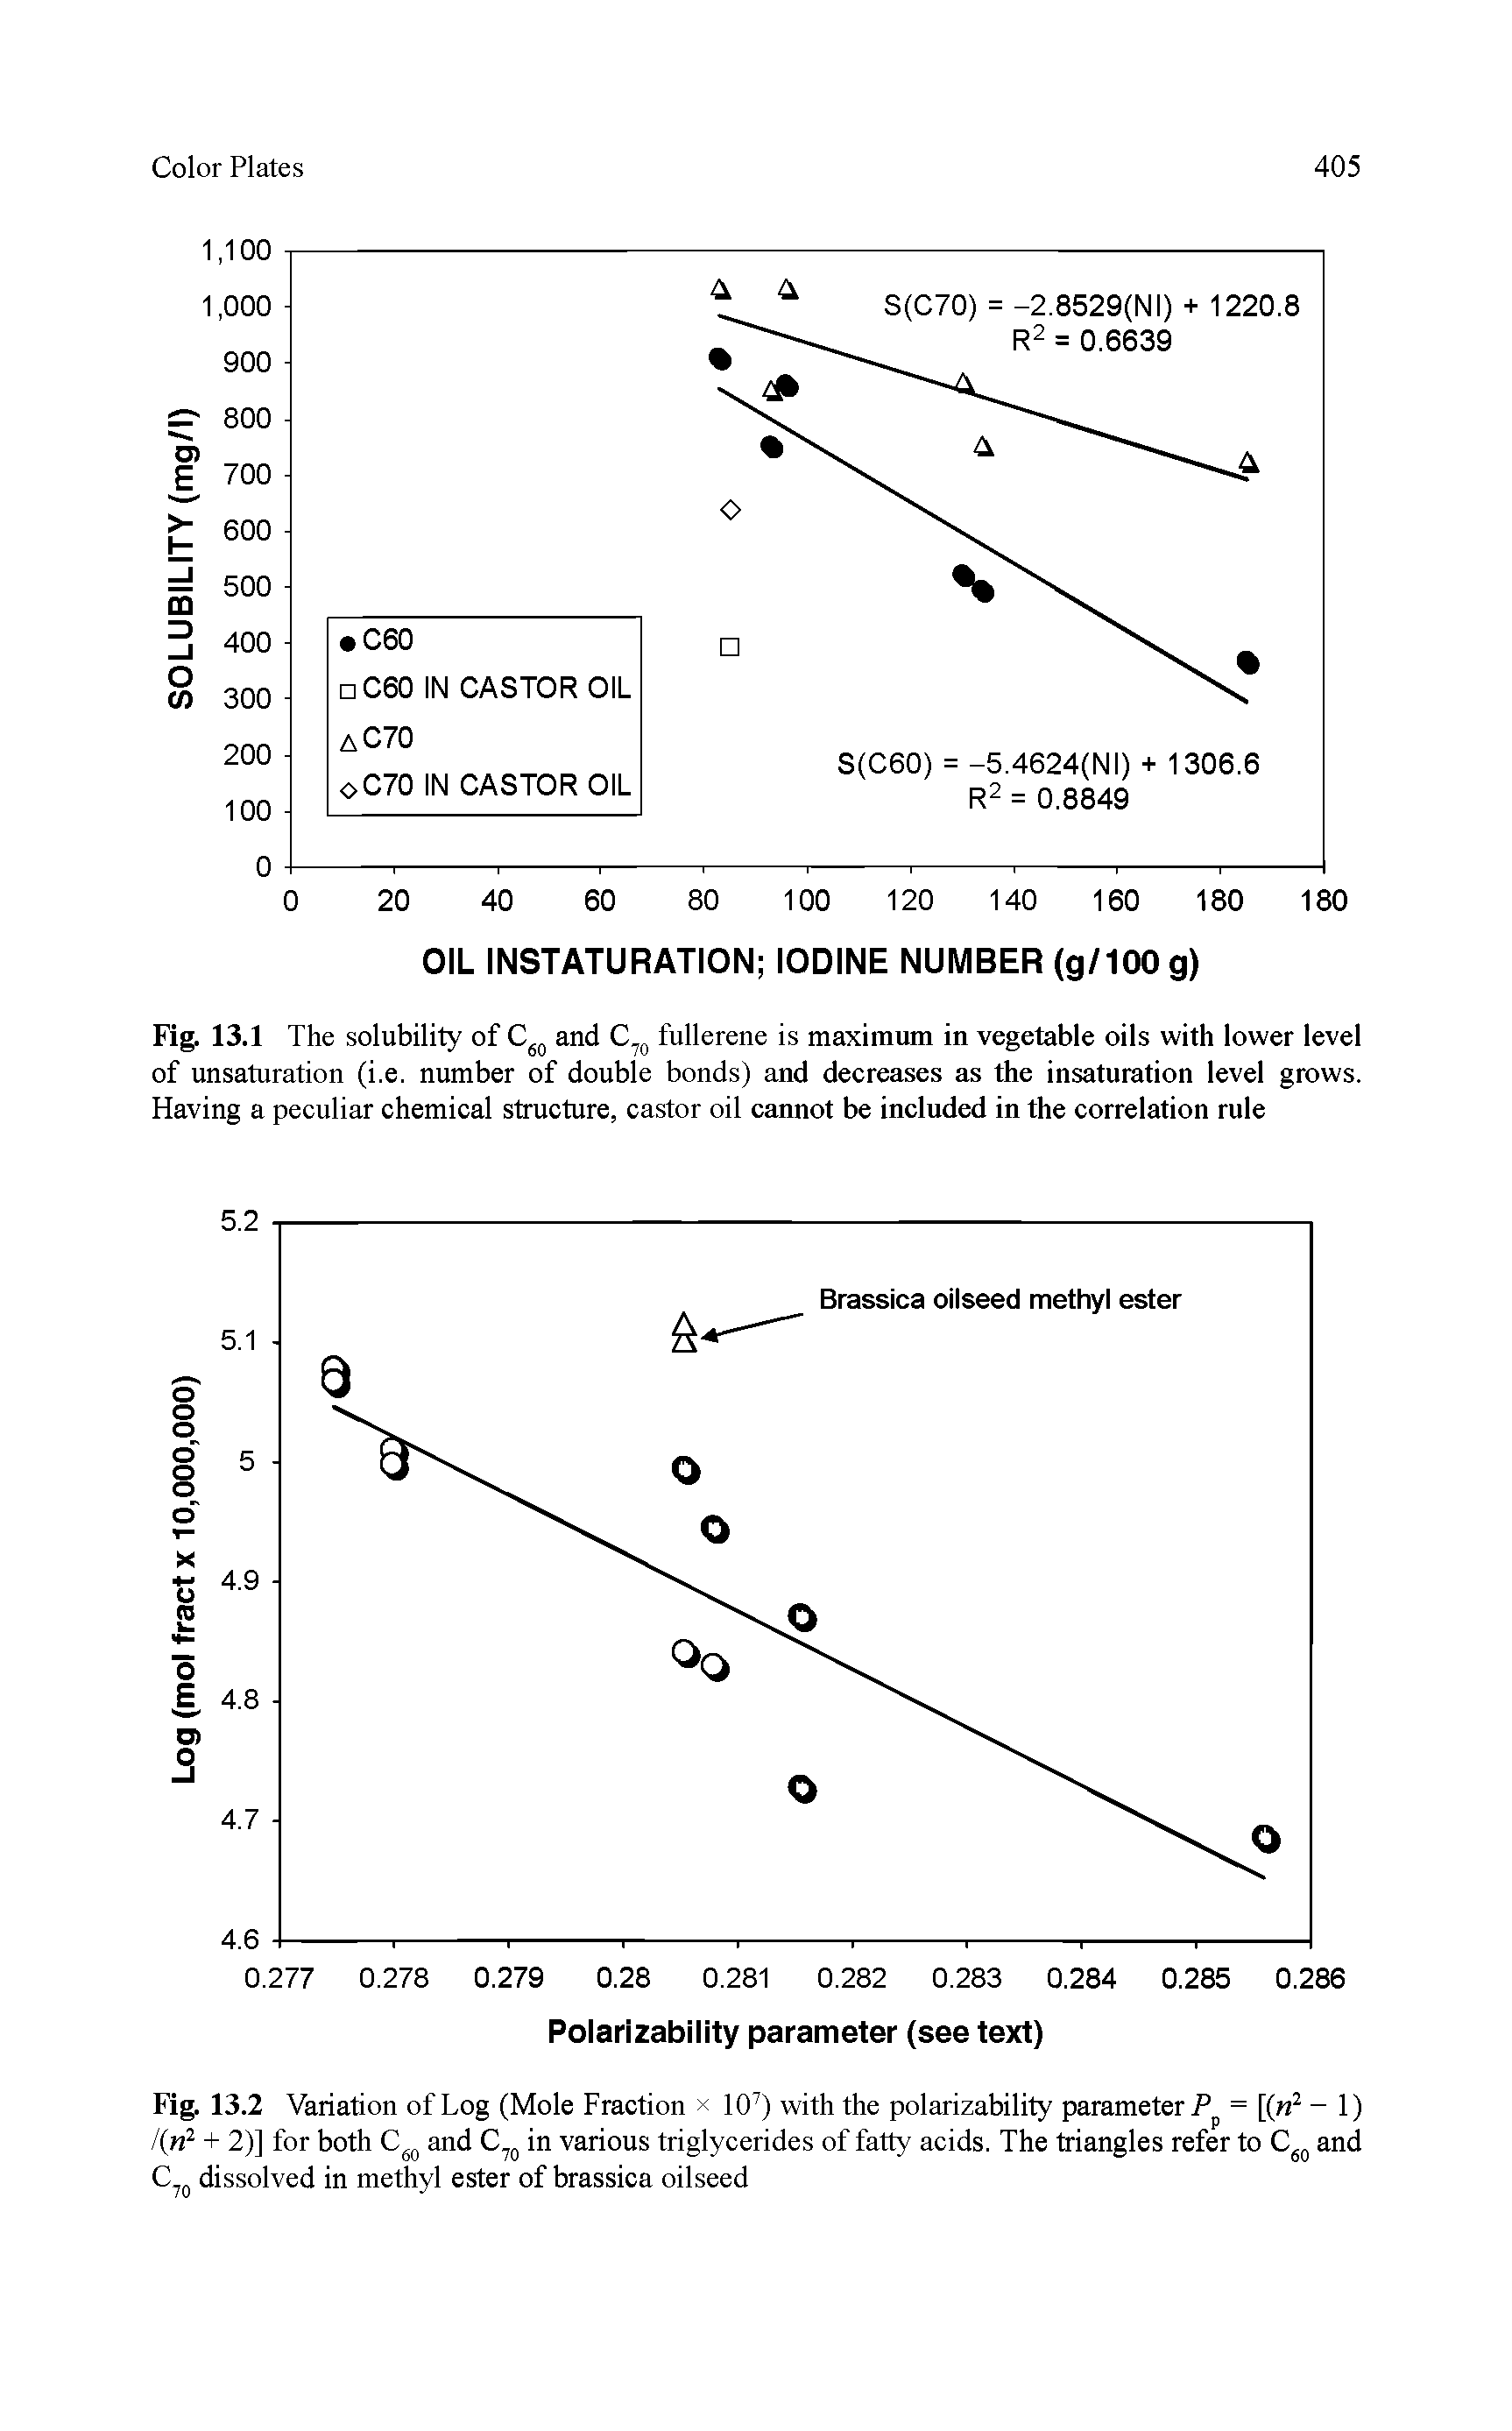 Fig. 13.2 Variation of Log (Mole Fraction 107) with the polarizability parameter Pp = [( 2 - 1) /(n2 + 2)] for both C60 and C70 in various triglycerides of fatty acids. The triangles refer to C60 and C 0 dissolved in methyl ester of brassica oilseed...